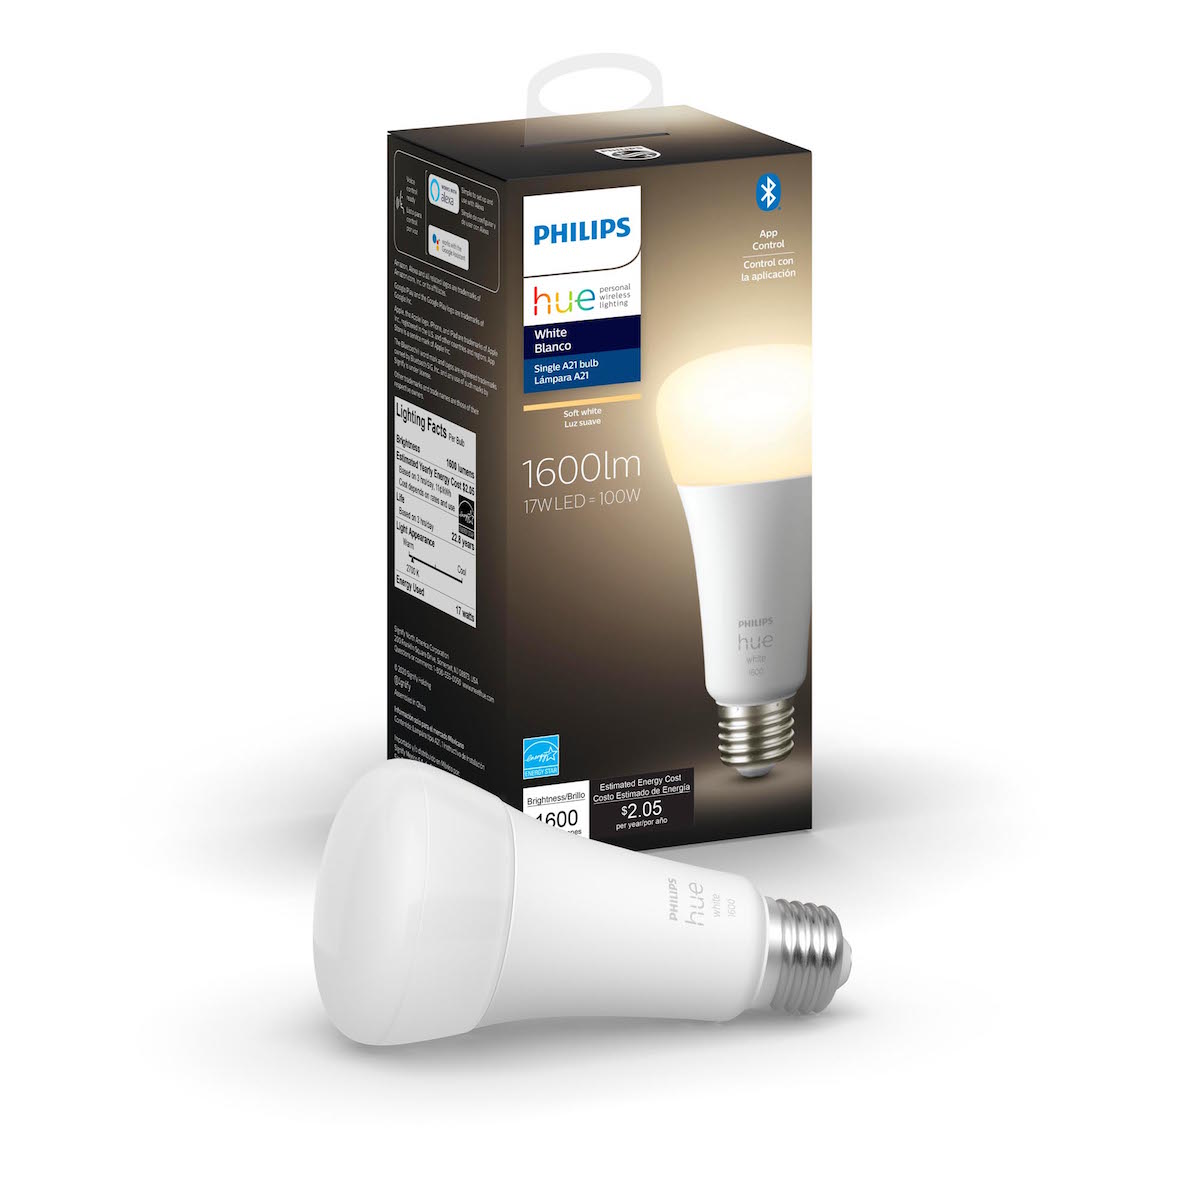 Philips Hue White 1600lm